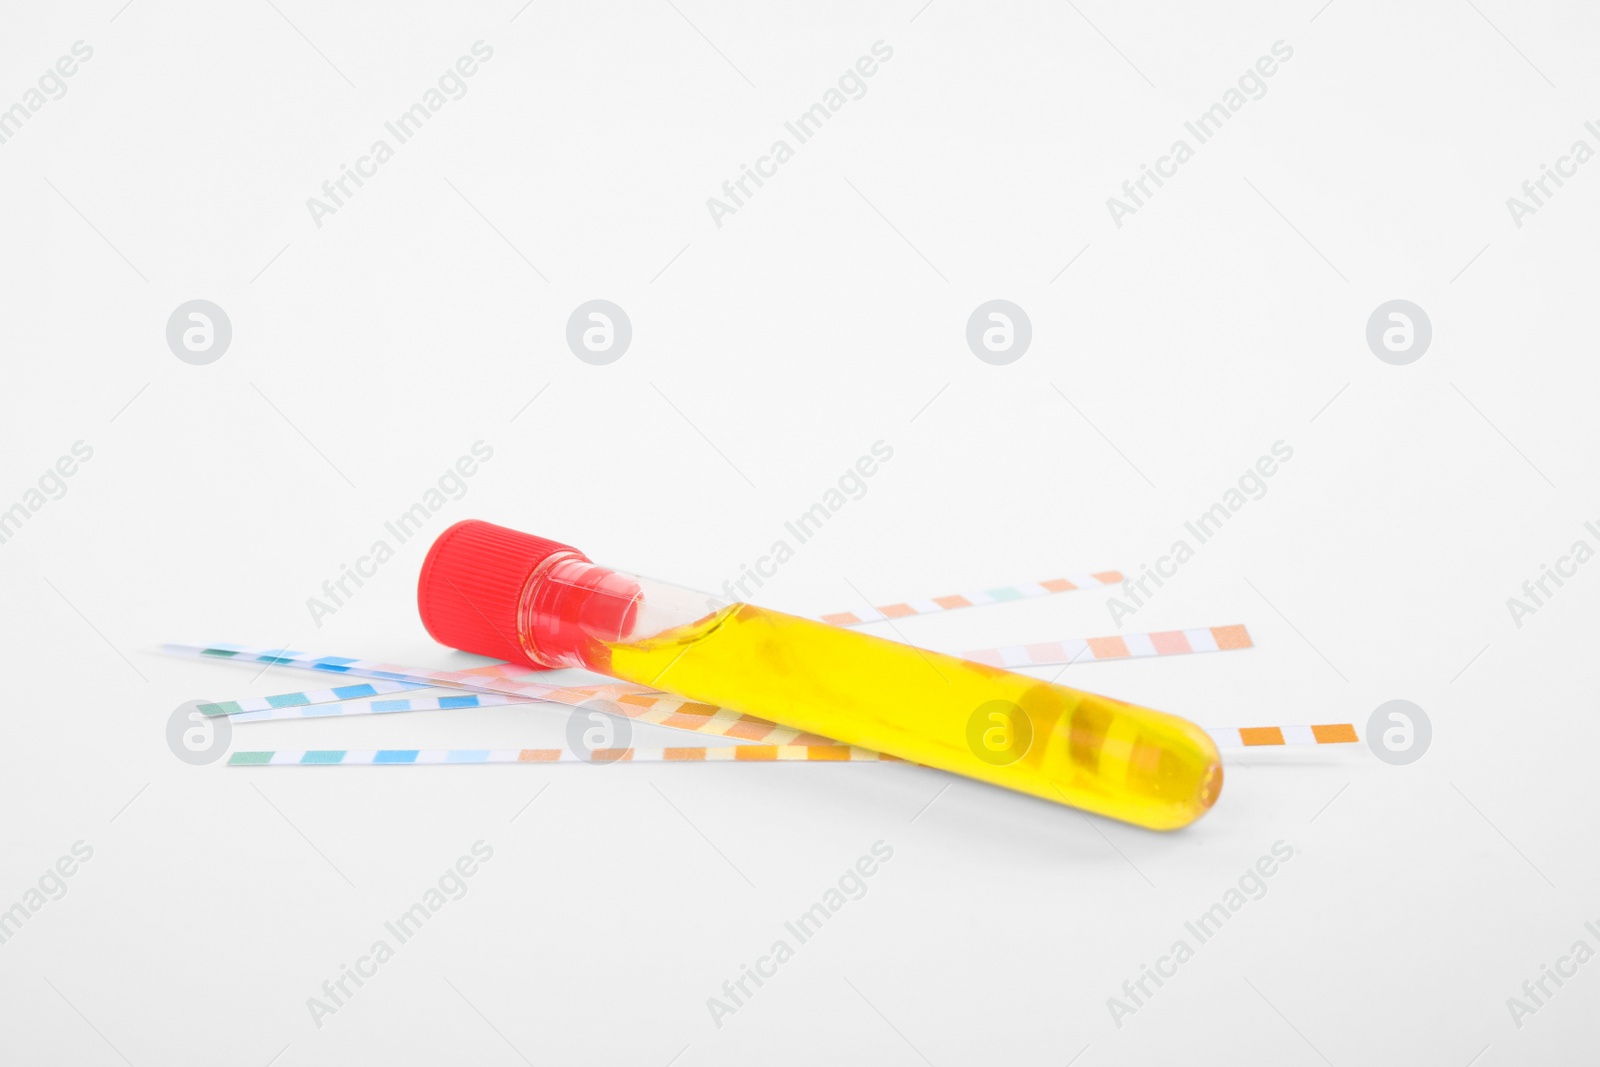 Photo of Test tube with urine sample for analysis on white background